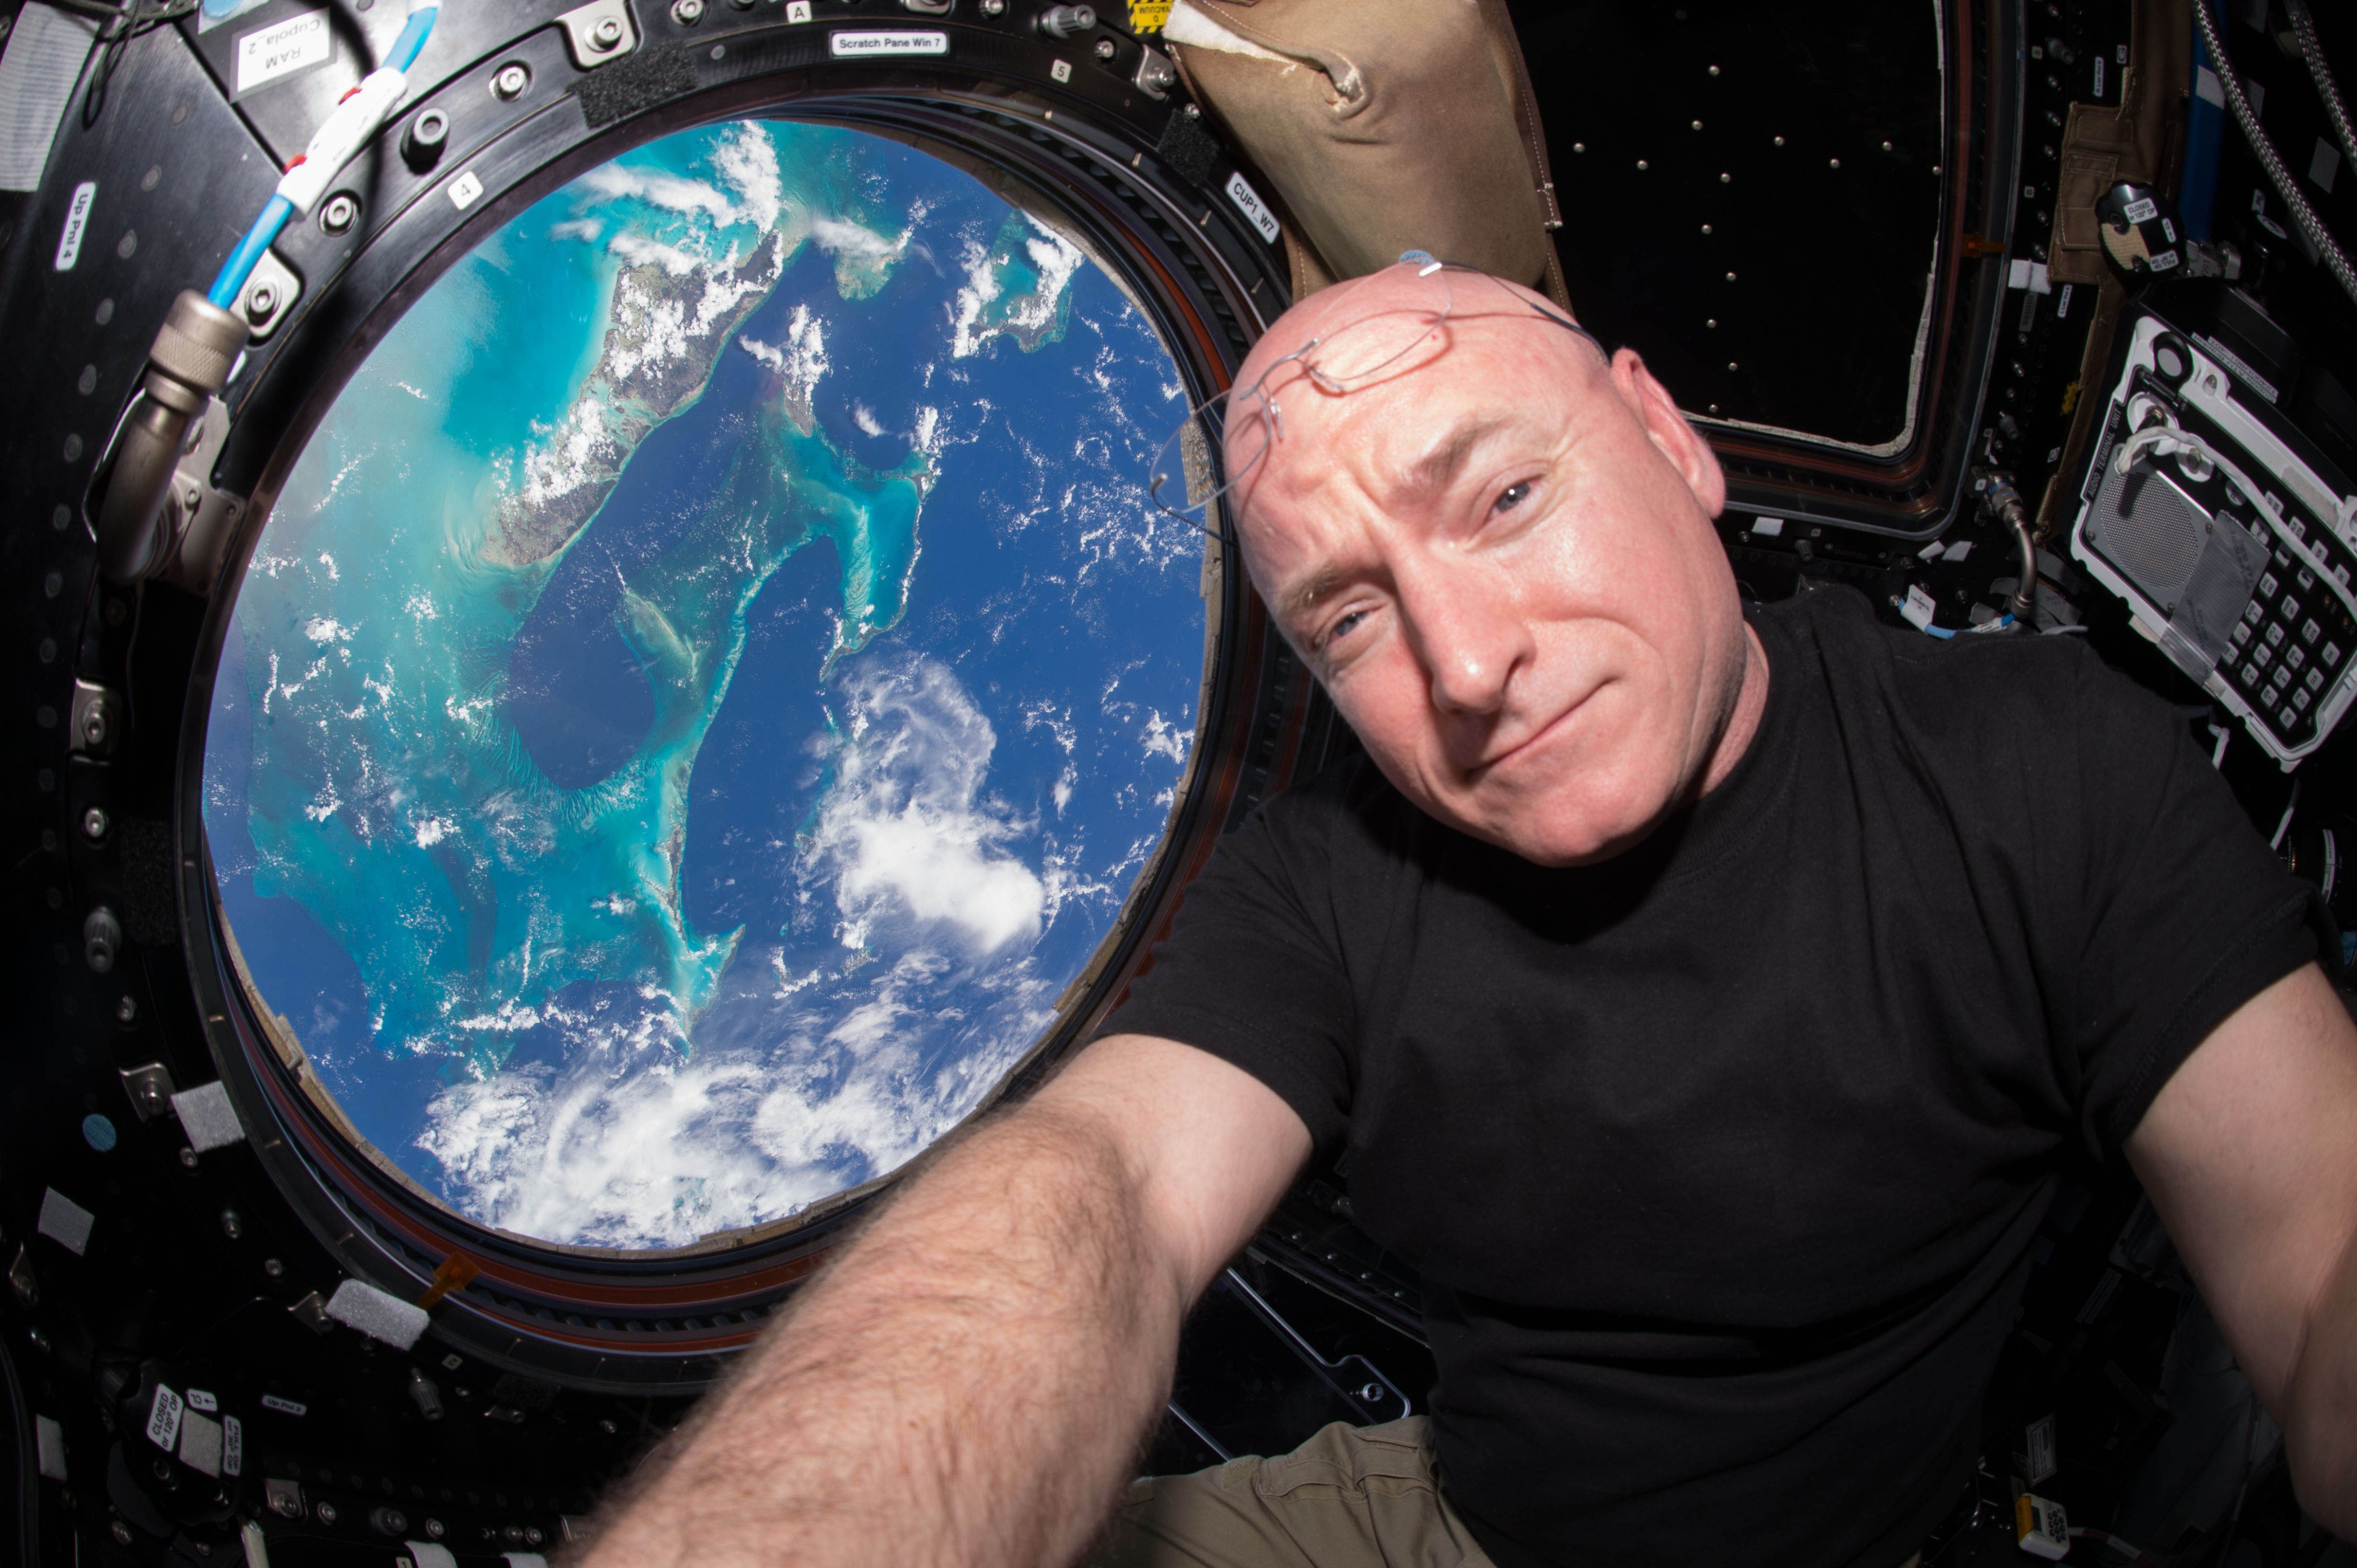 Scott Kelly poses for a selfie photo in the 